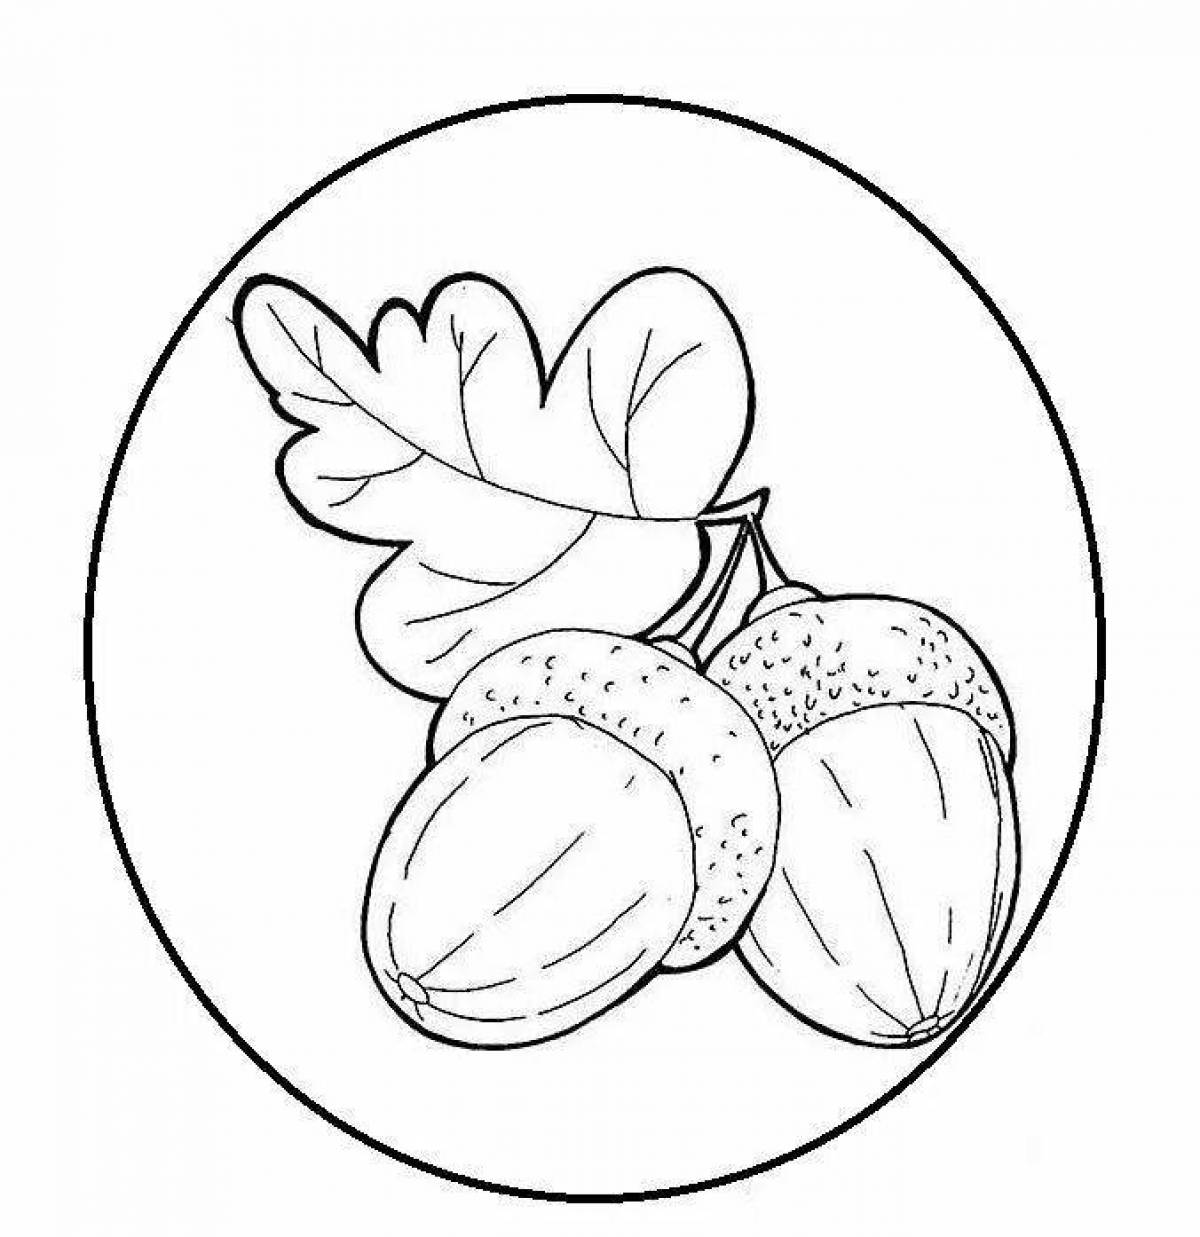 Playful acorn coloring page